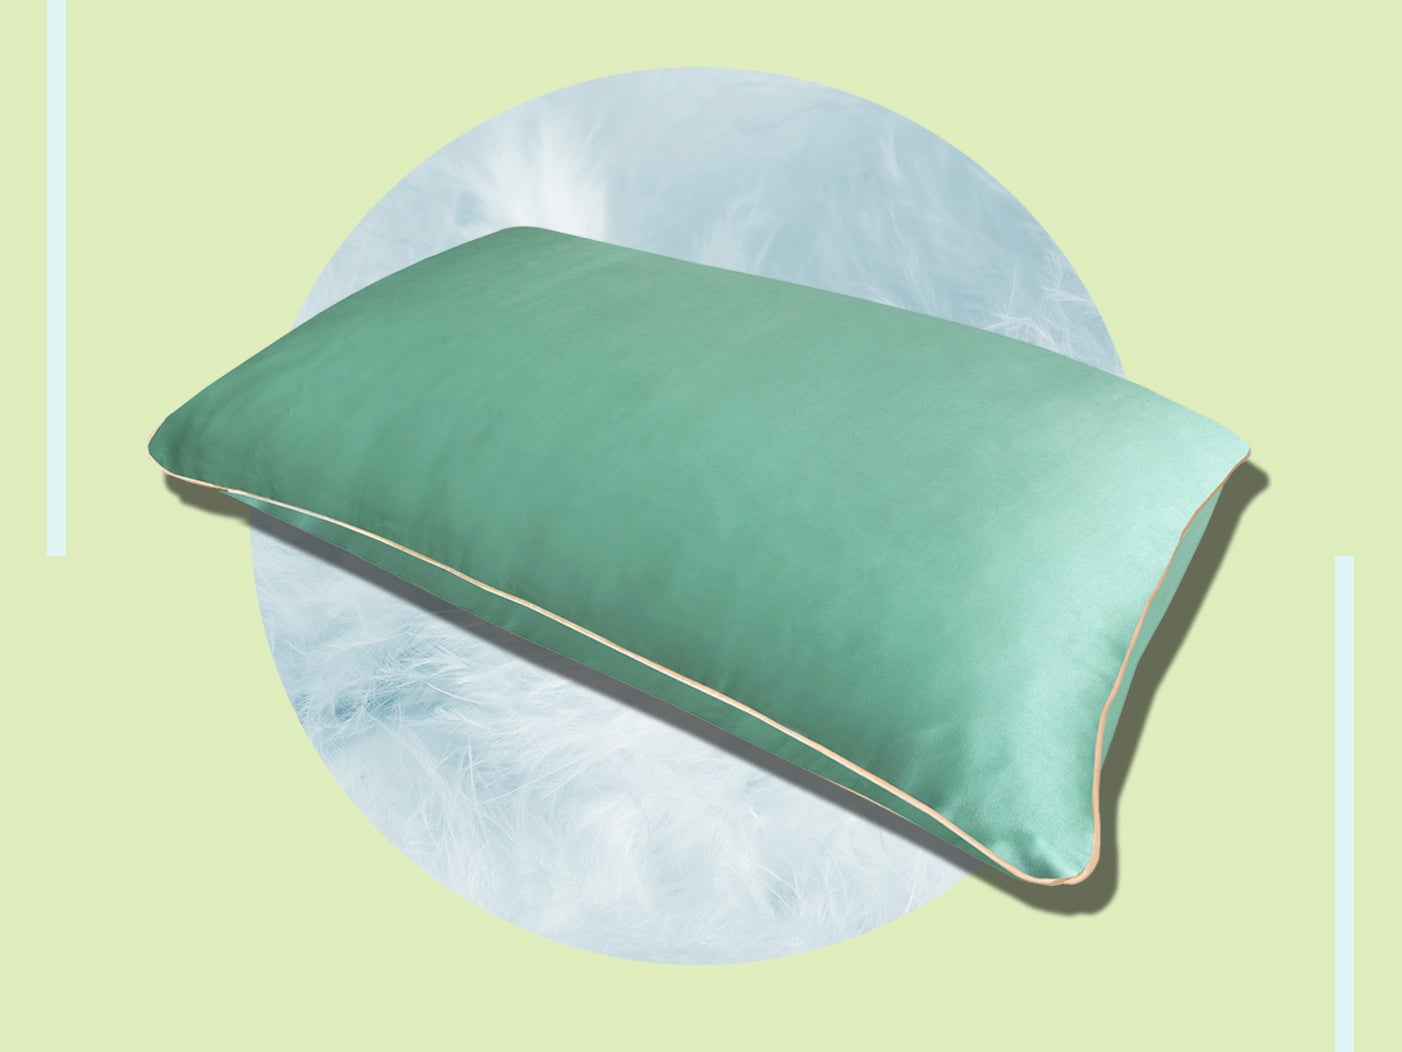 Hypoallergenic and temperature controlling, silk bedding can also hydrate the skin and prevent frizzy bedhead